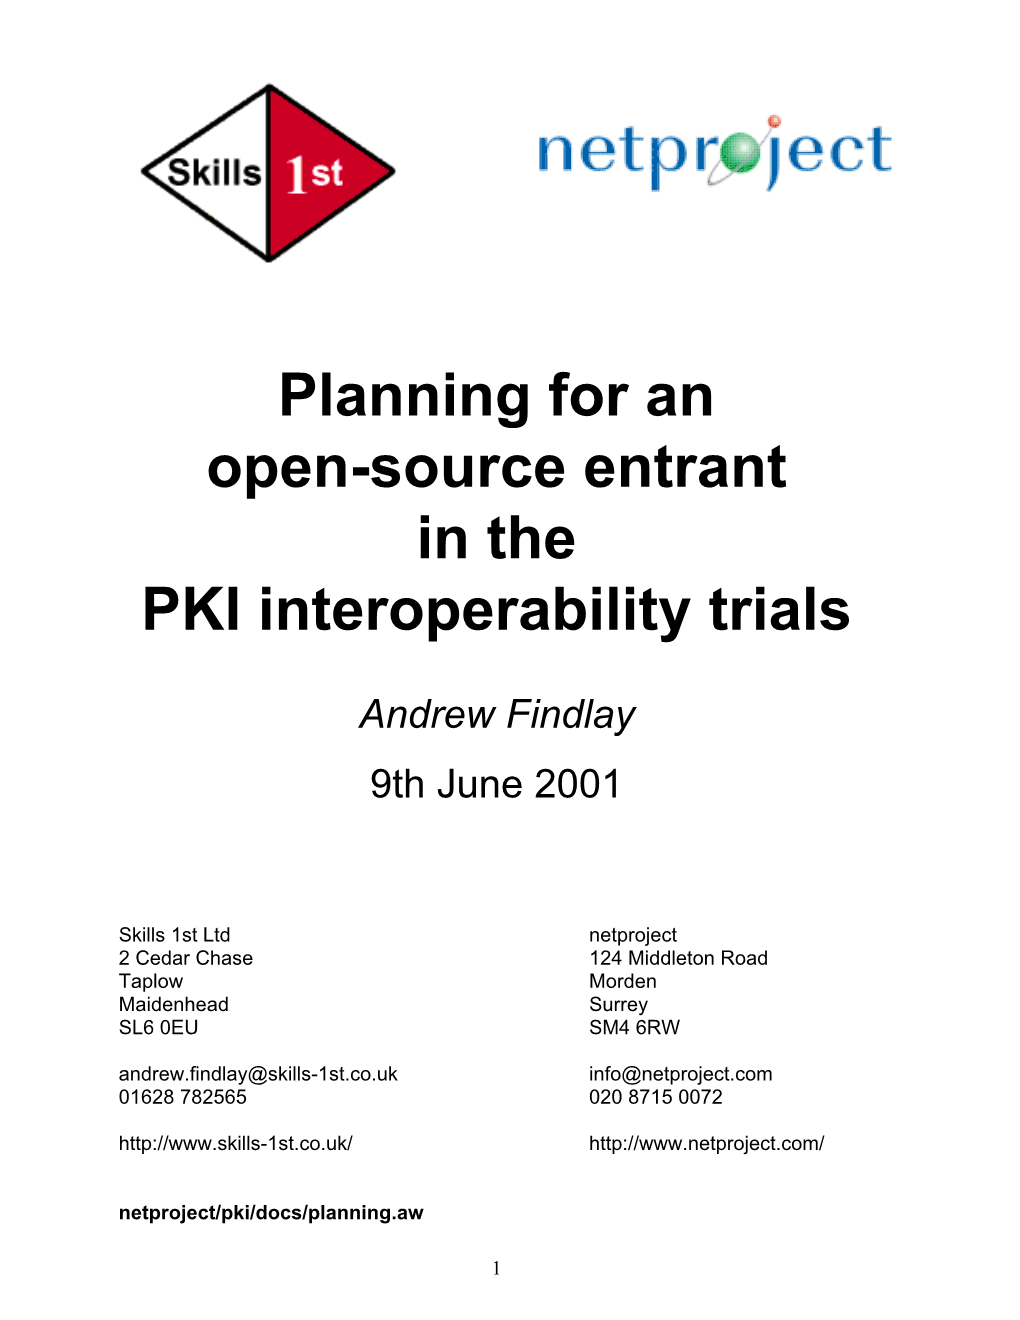 Planning for an Open-Source Entrant in the PKI Interoperability Trials